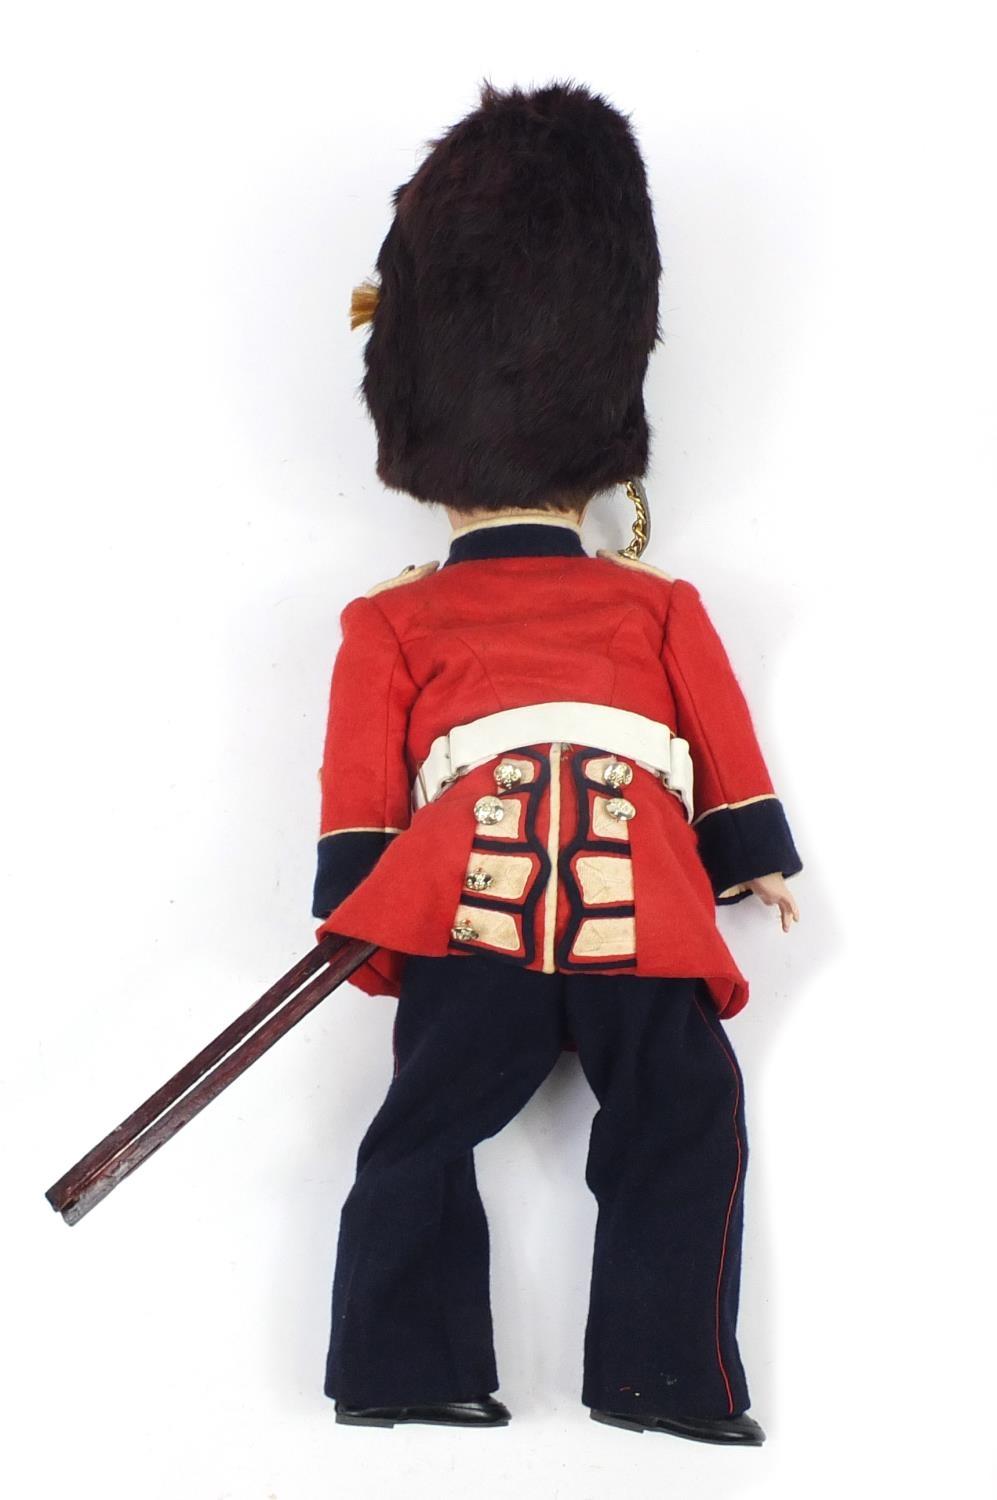 Simon & Halbig bisque headed Beefeater doll, 71cm high - Image 5 of 6